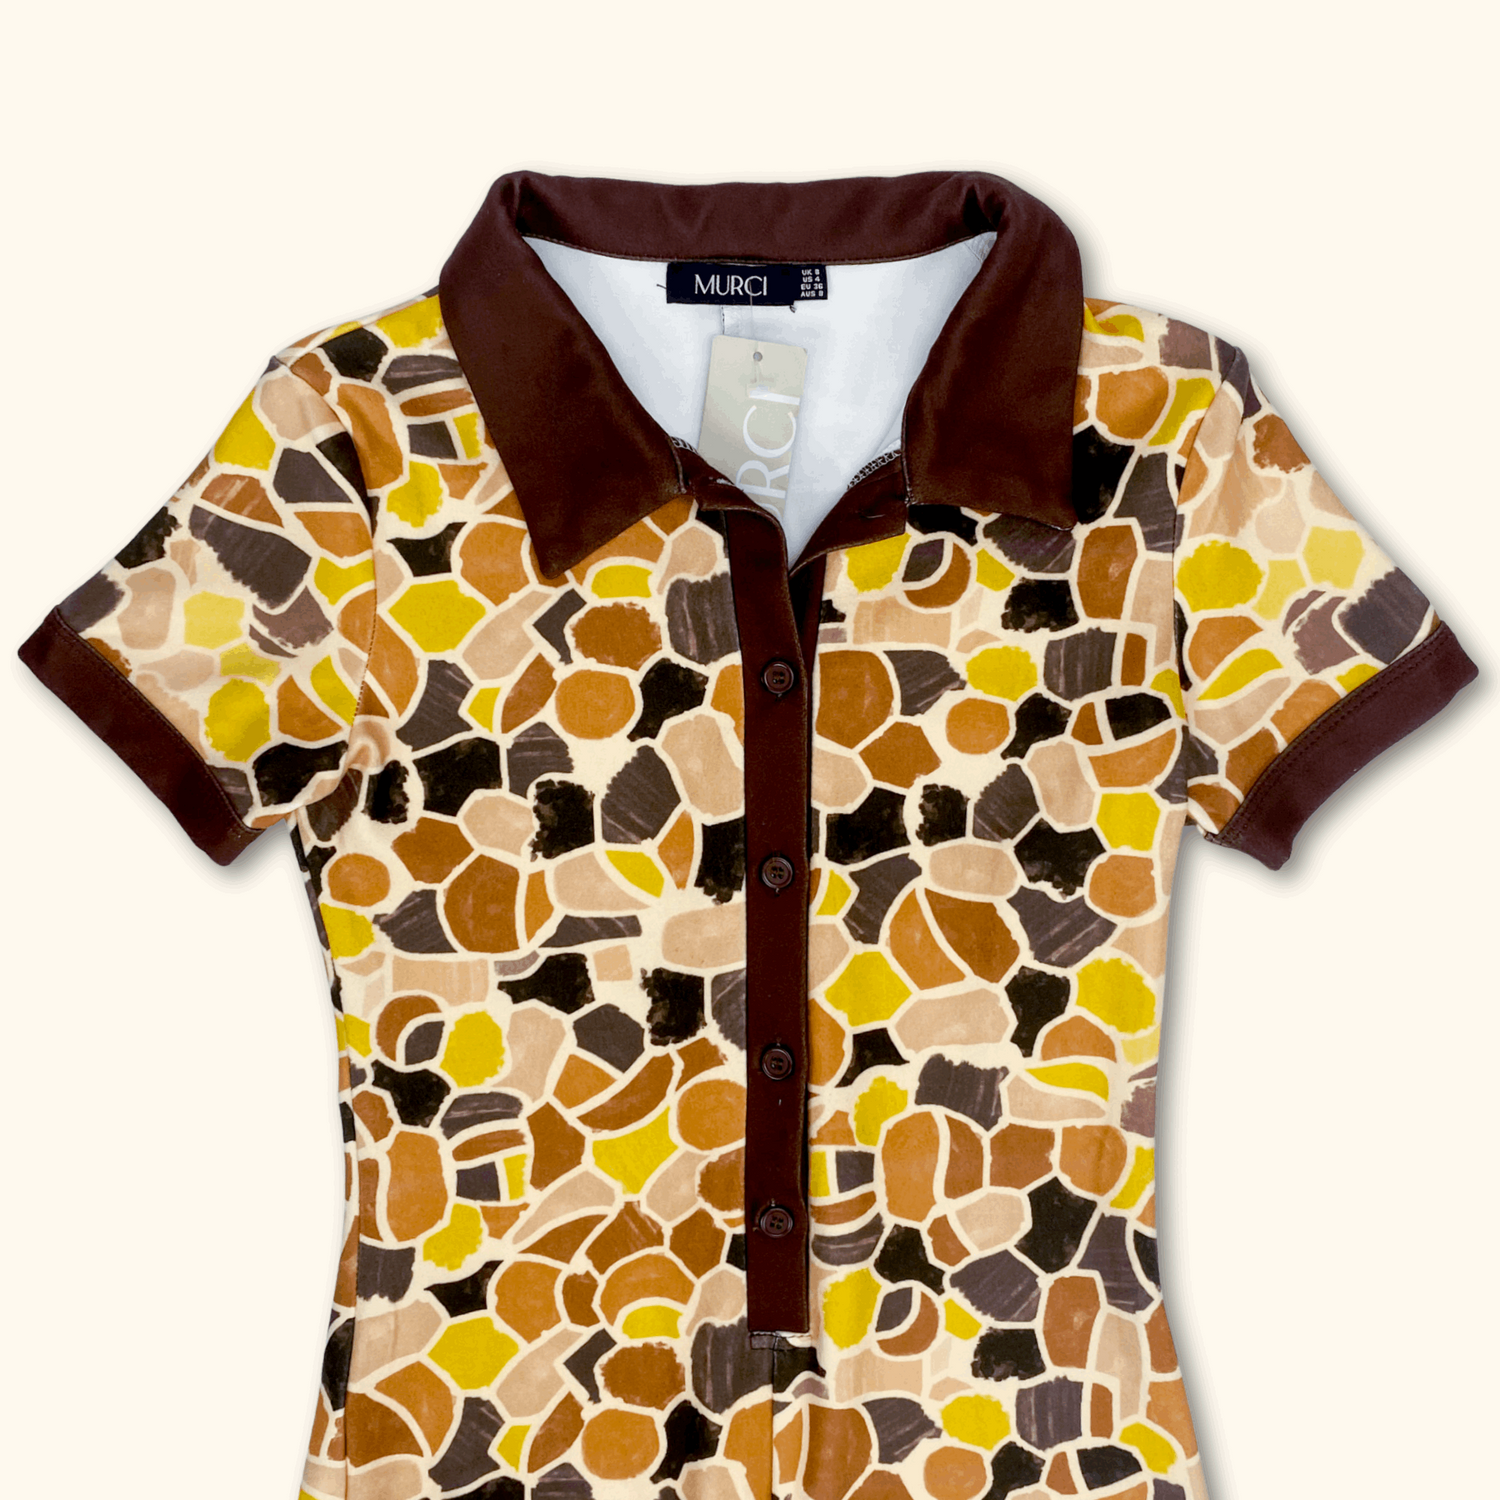 Murci 70s Inspired Brown Short Sleeve Patterned Playsuit - Size 8 - Murci - Playsuits